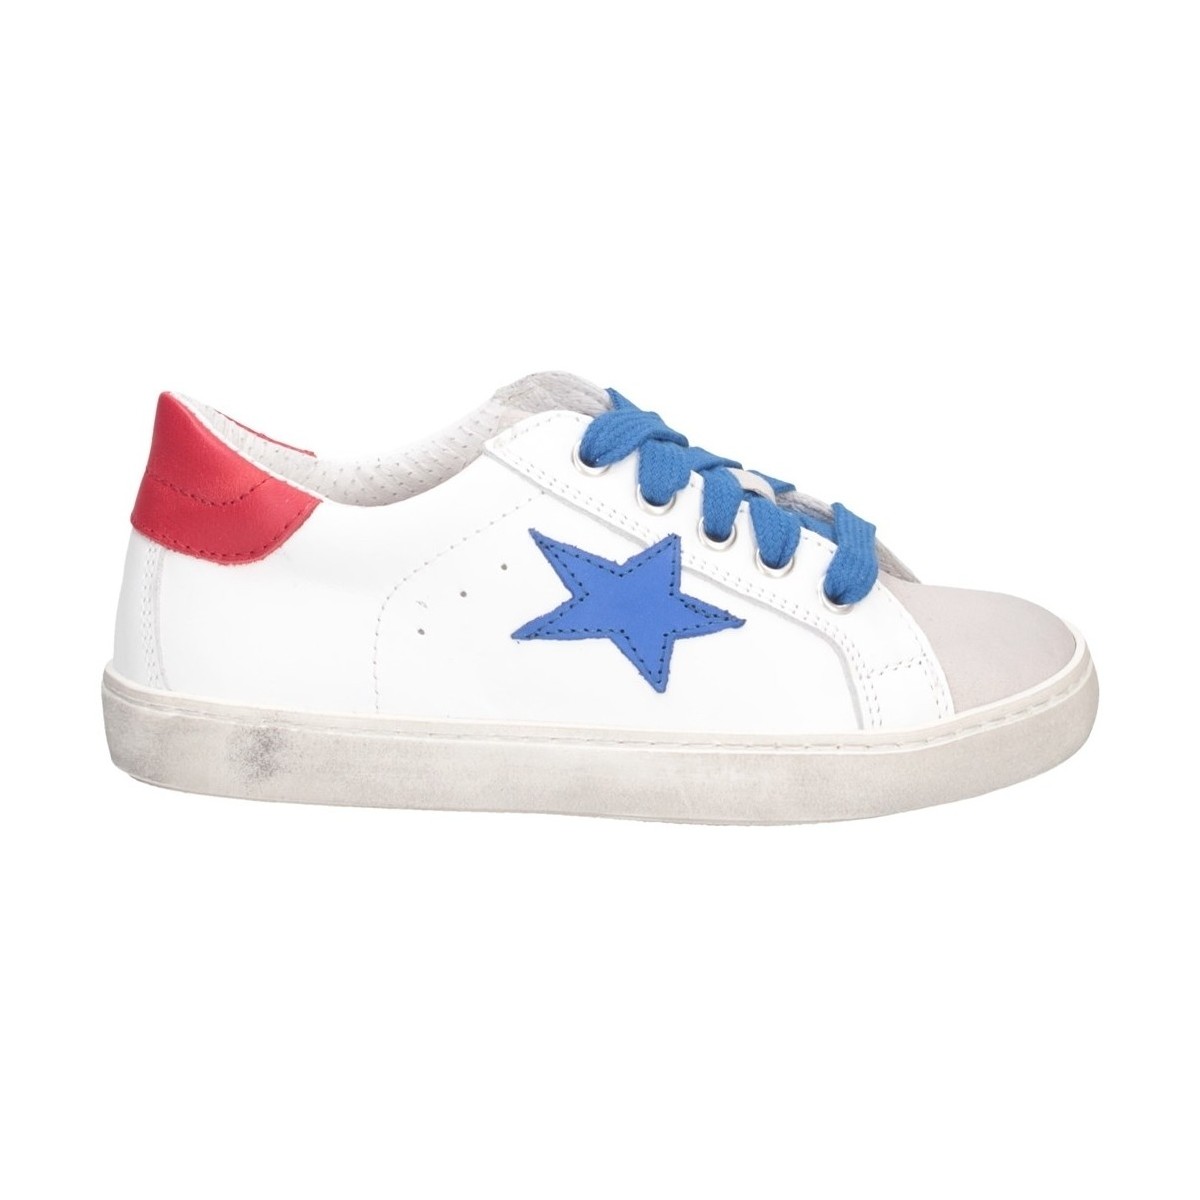 Chaussures Fille Baskets basses Dianetti Made In Italy I9869 Basket Enfant BLANC ROUGE Multicolore